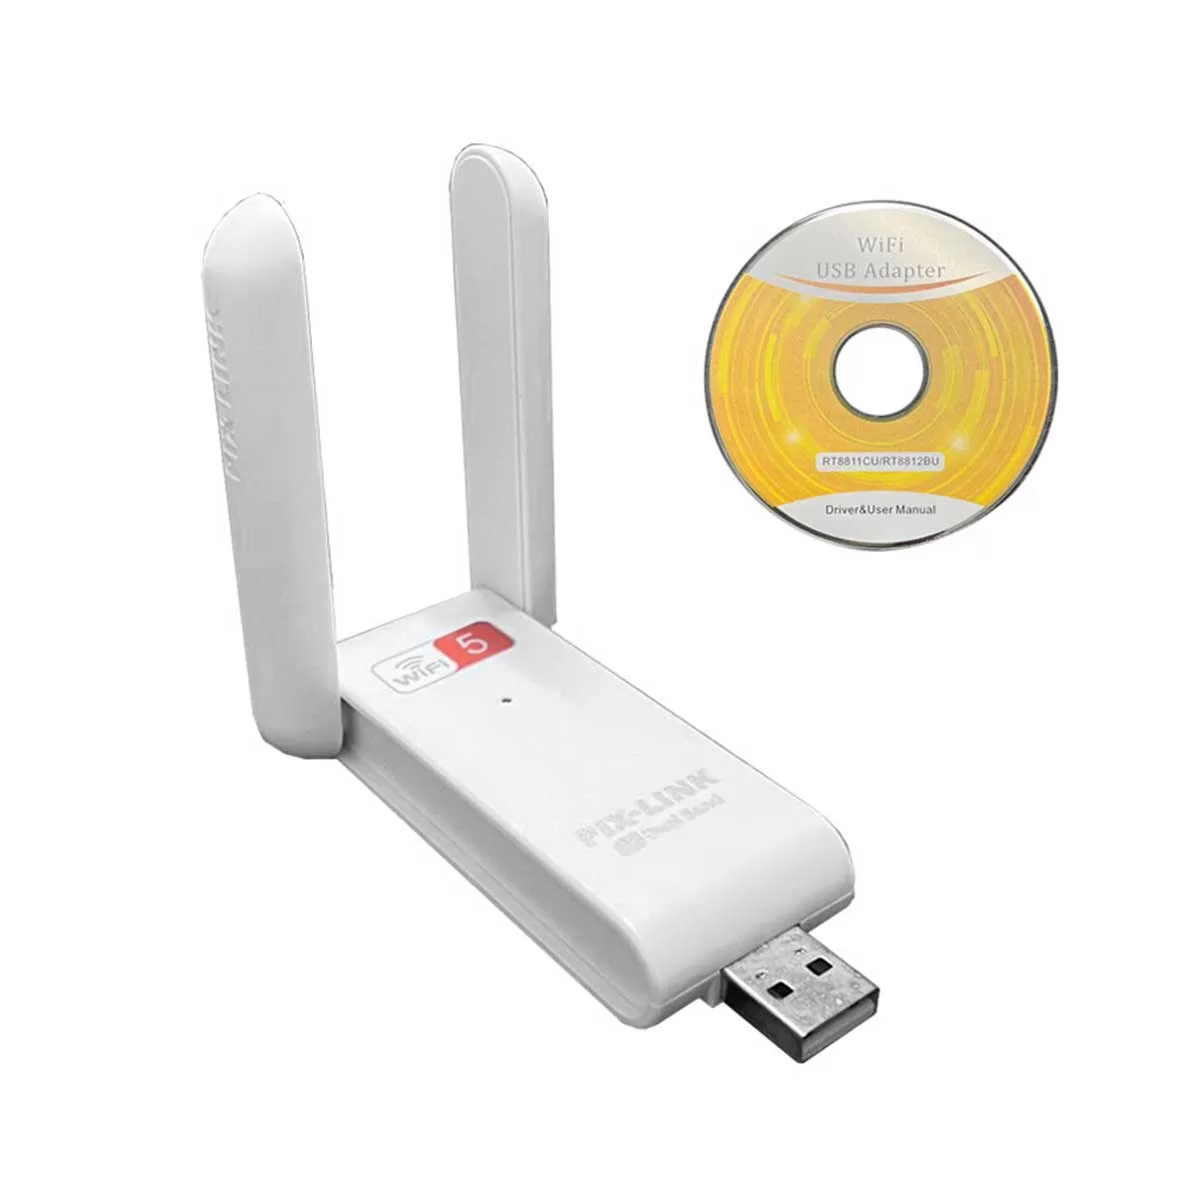 Repeater – WiFi Extender Dual Band 2.4GHz 300Mbps και 5GHz 866Mbps 007 Λευκό